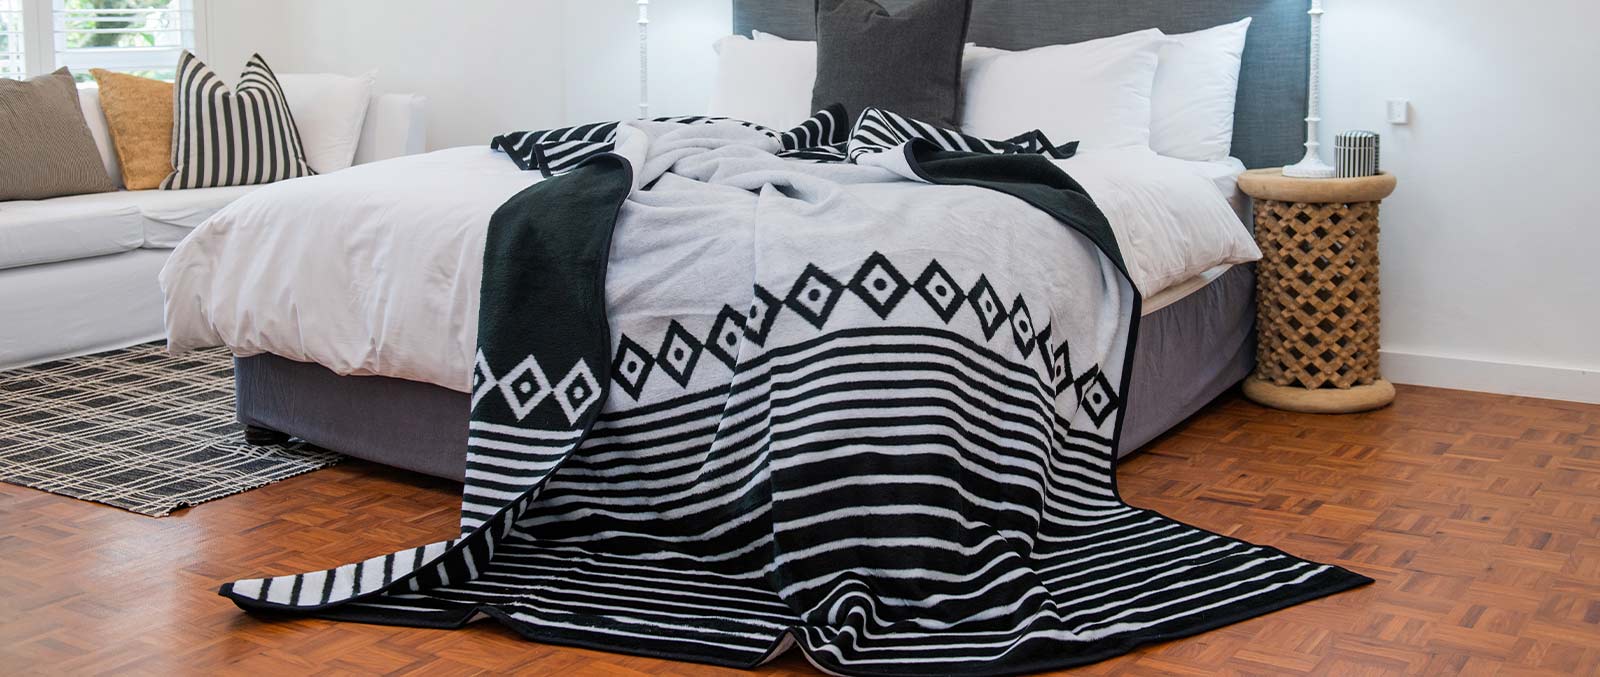 Thula Tula black and white blanket is placed on the bed